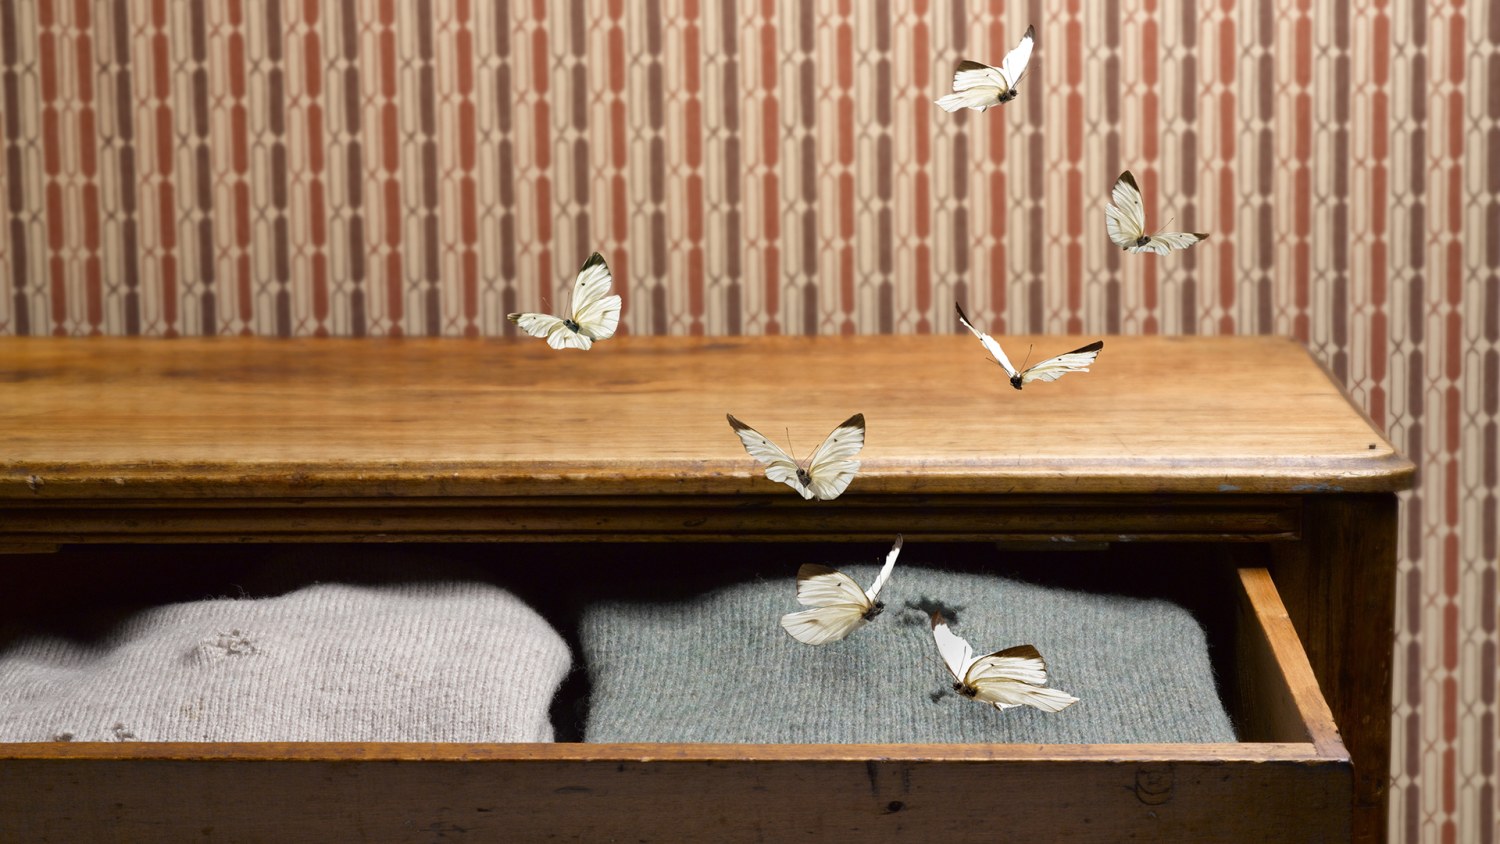 What to do if you find clothing moths and how to prevent them